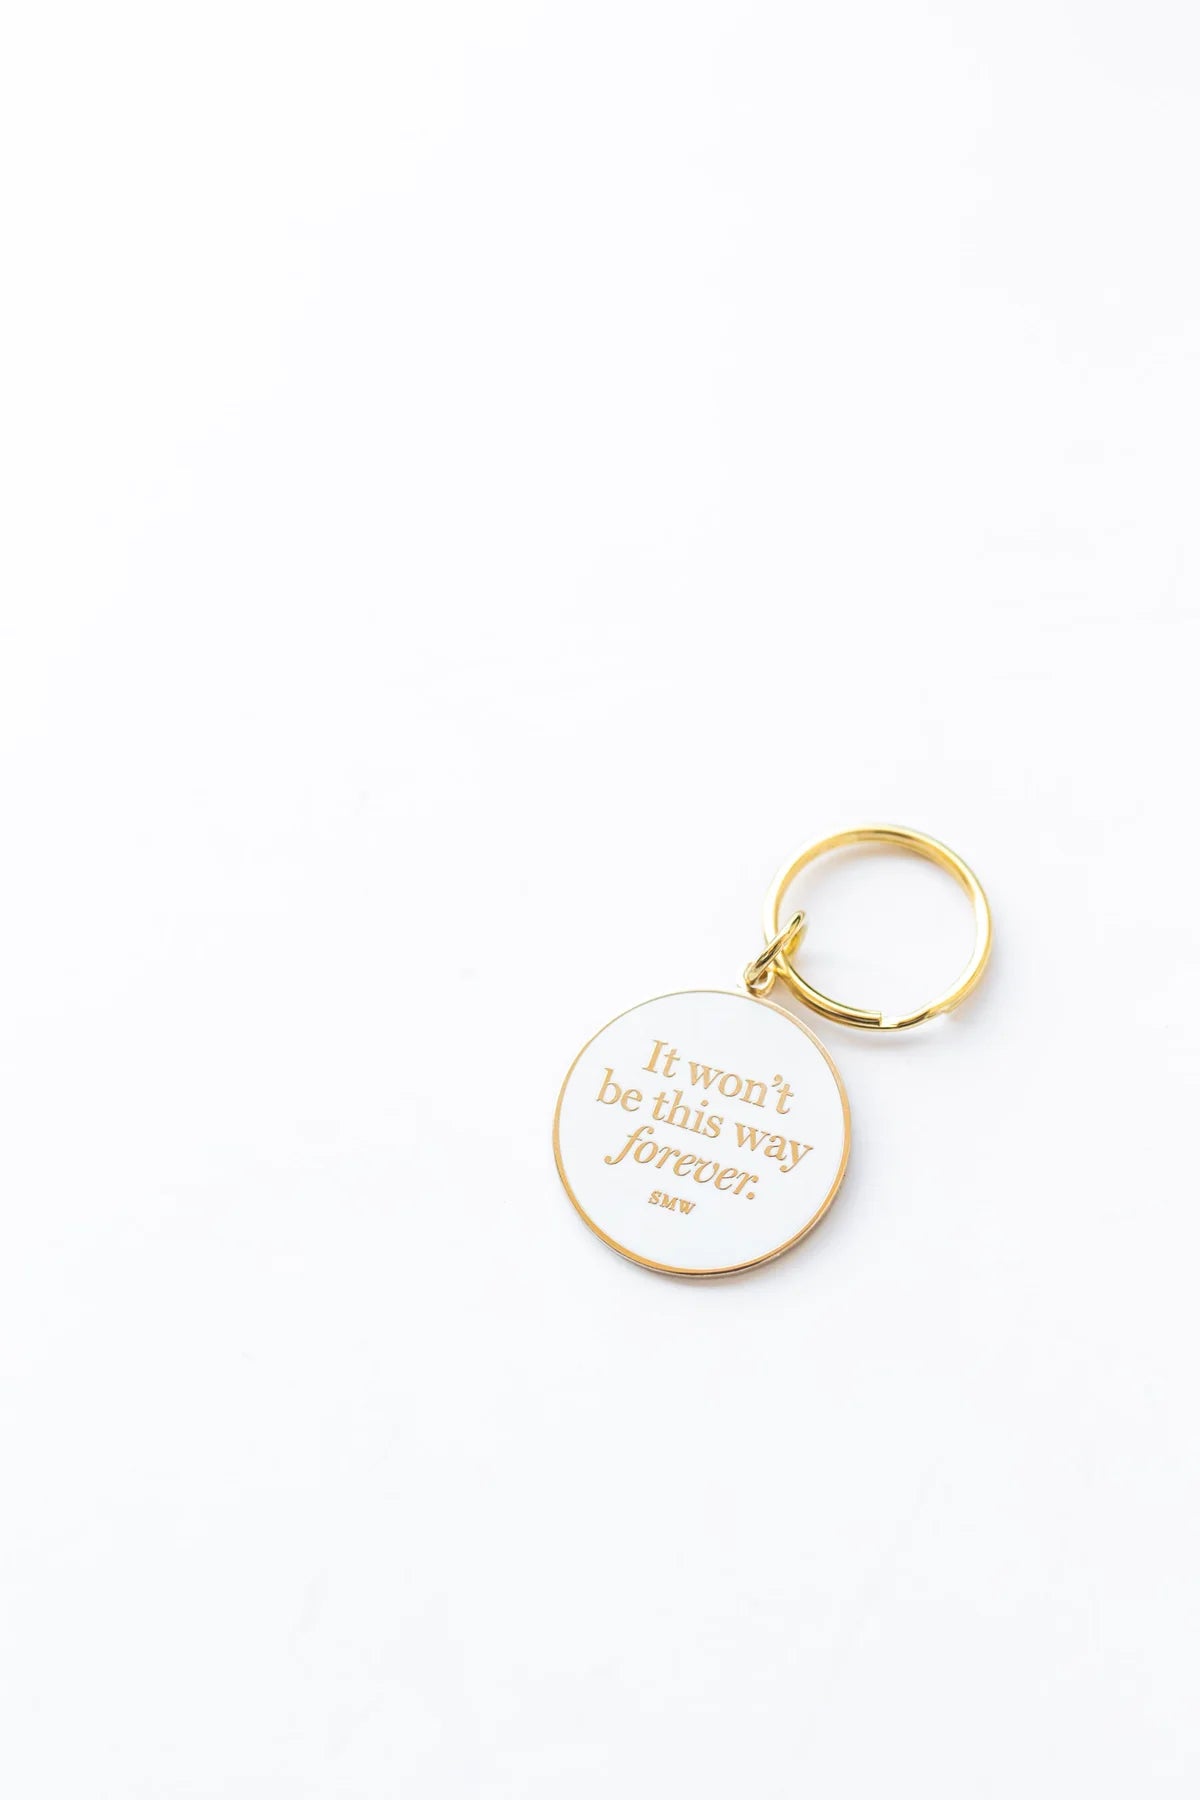 Forever Keychain - Inspirational quote reminder